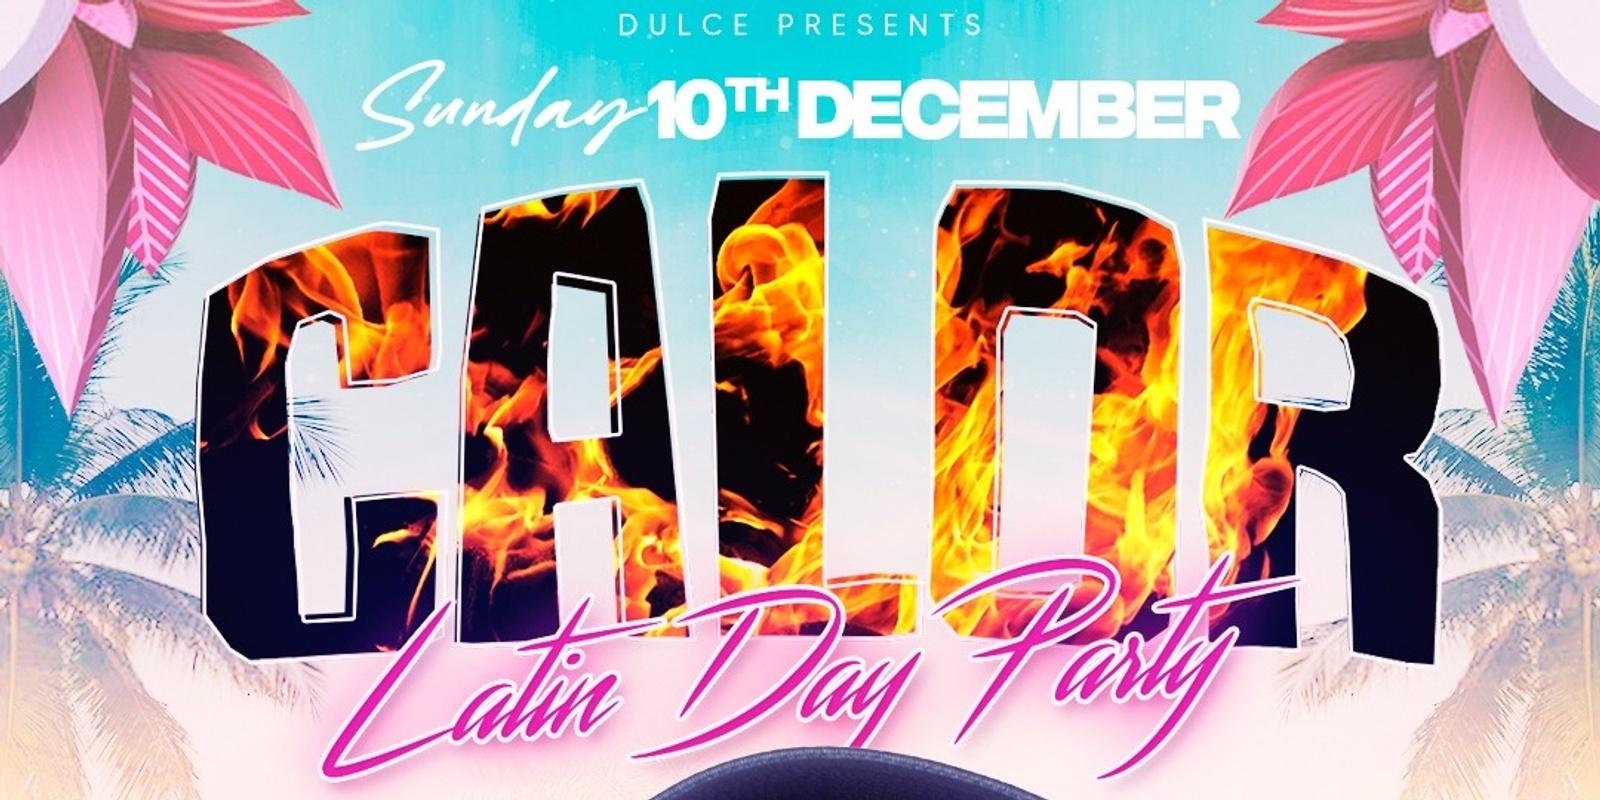 Banner image for Calor - Latin Day Party